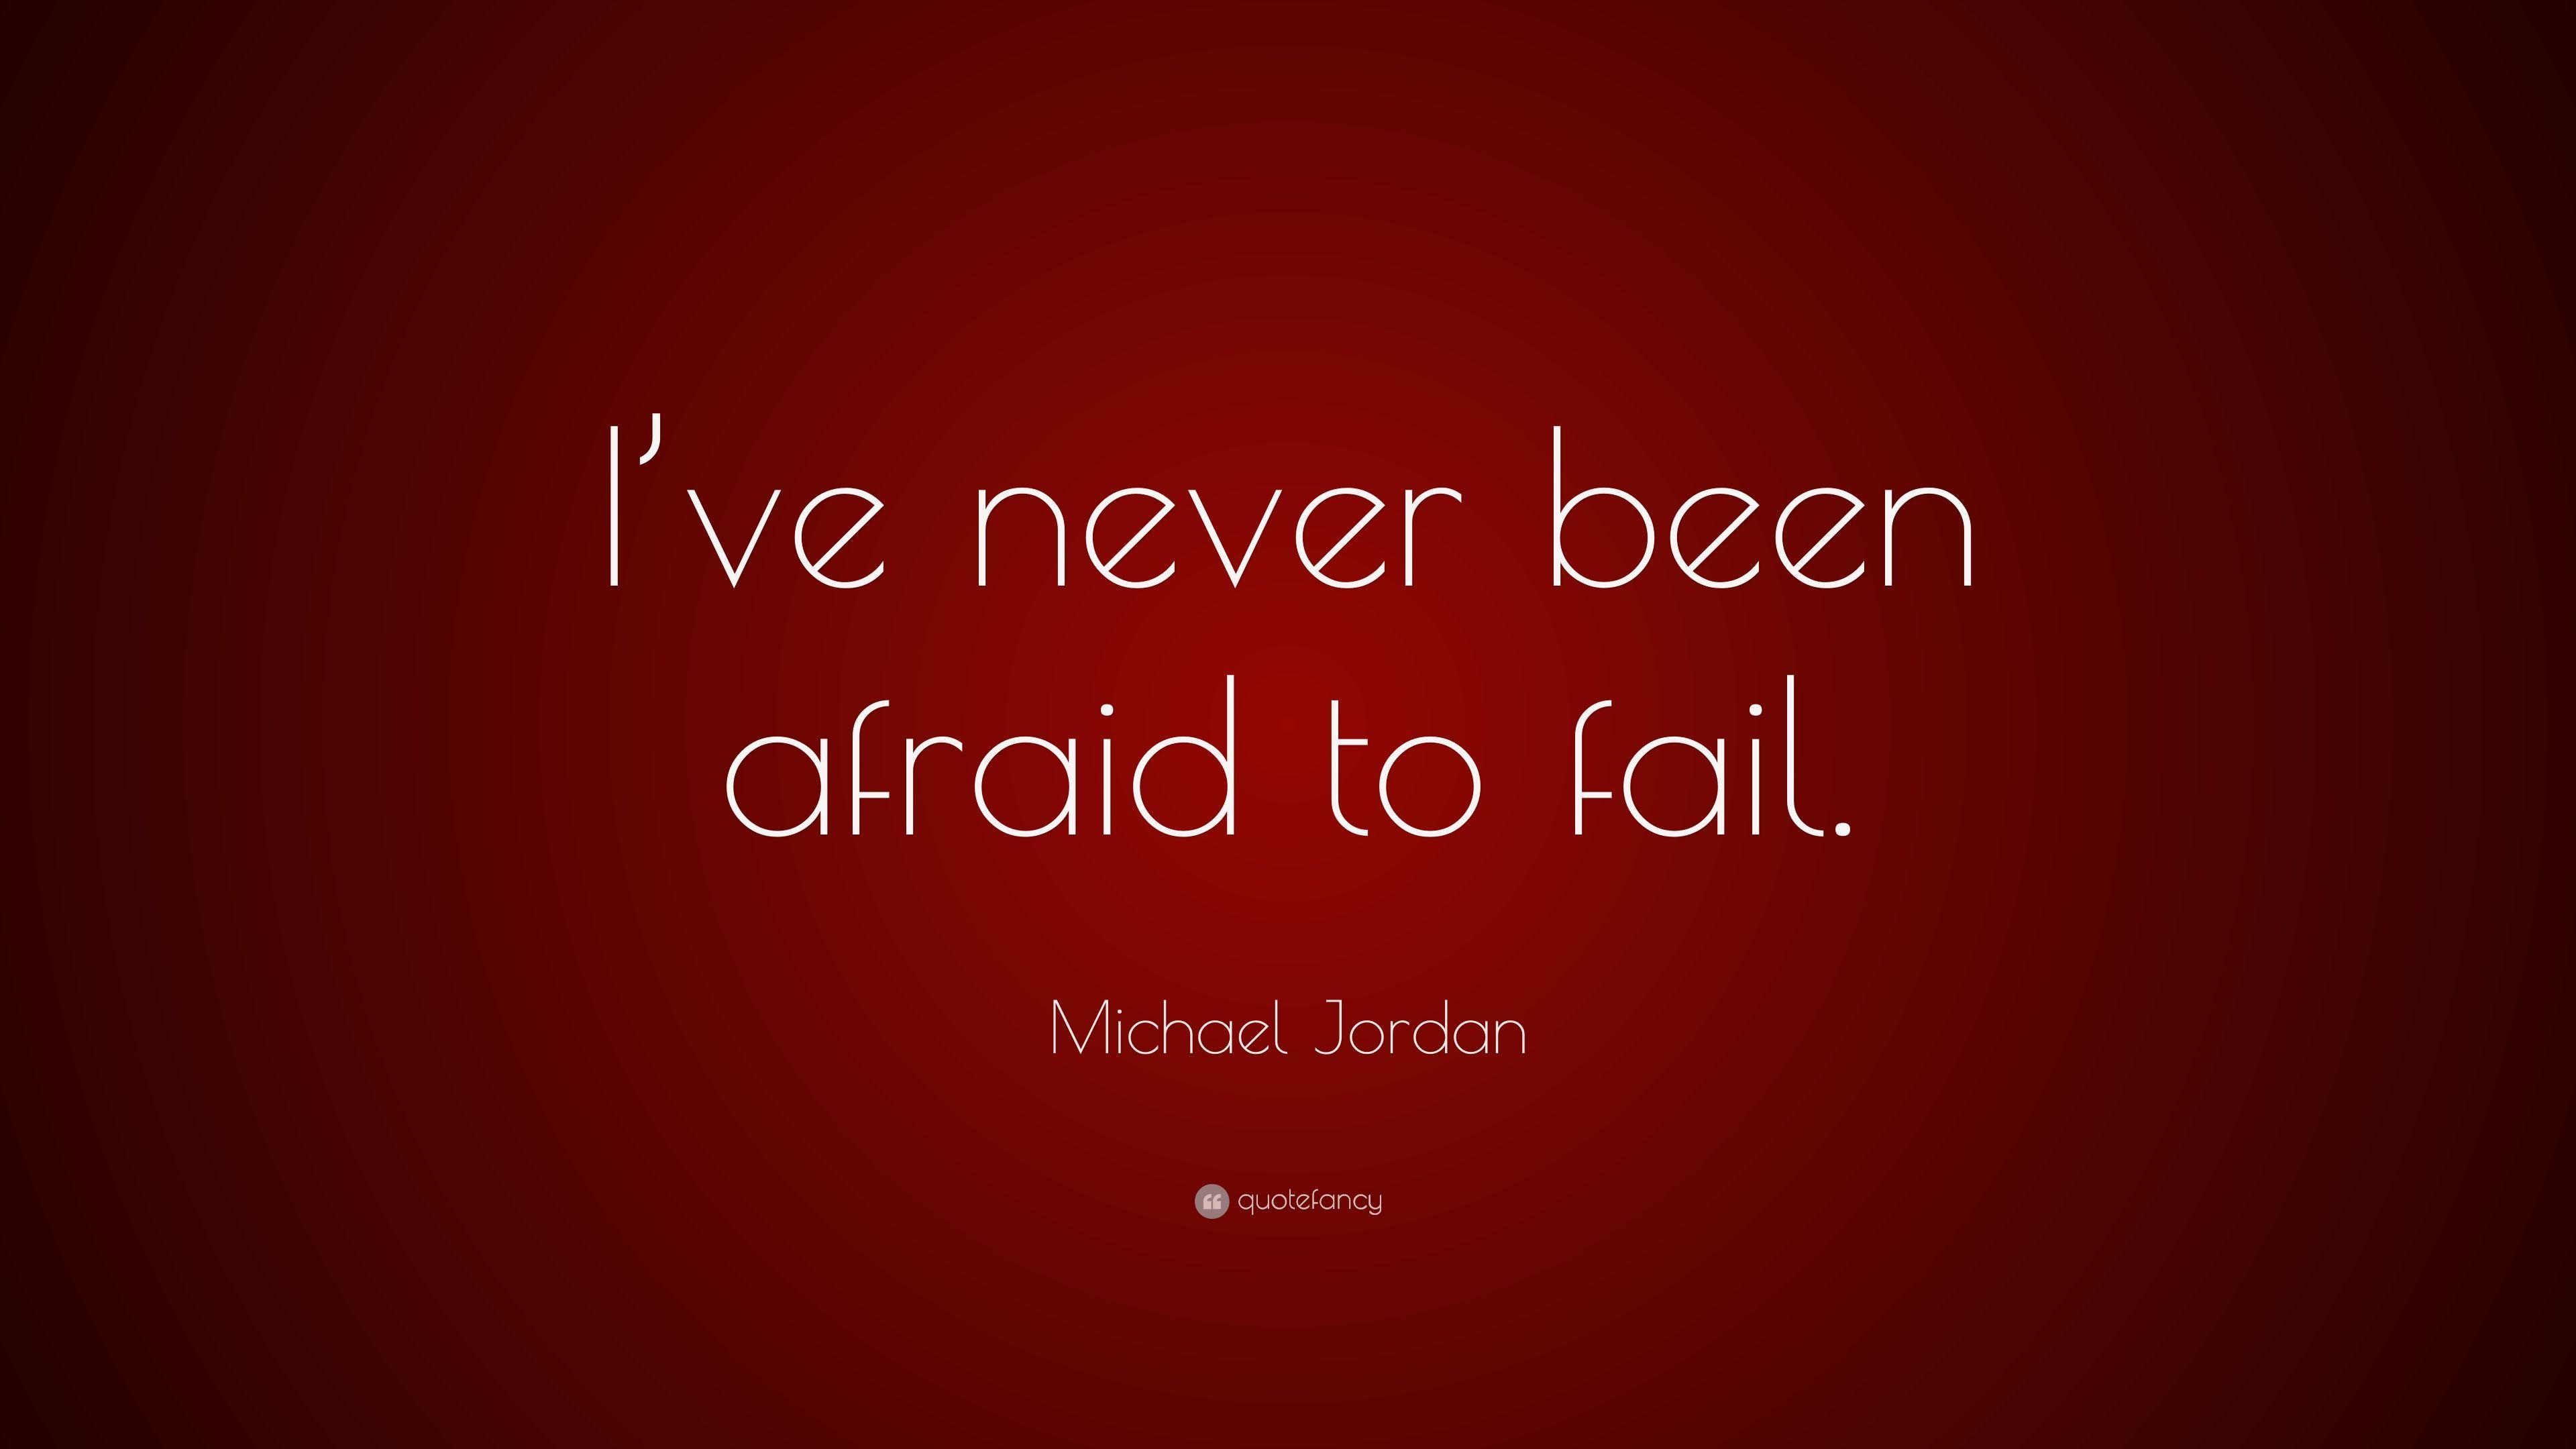 Michael Jordan Quote: “I've never been afraid to fail.” 27